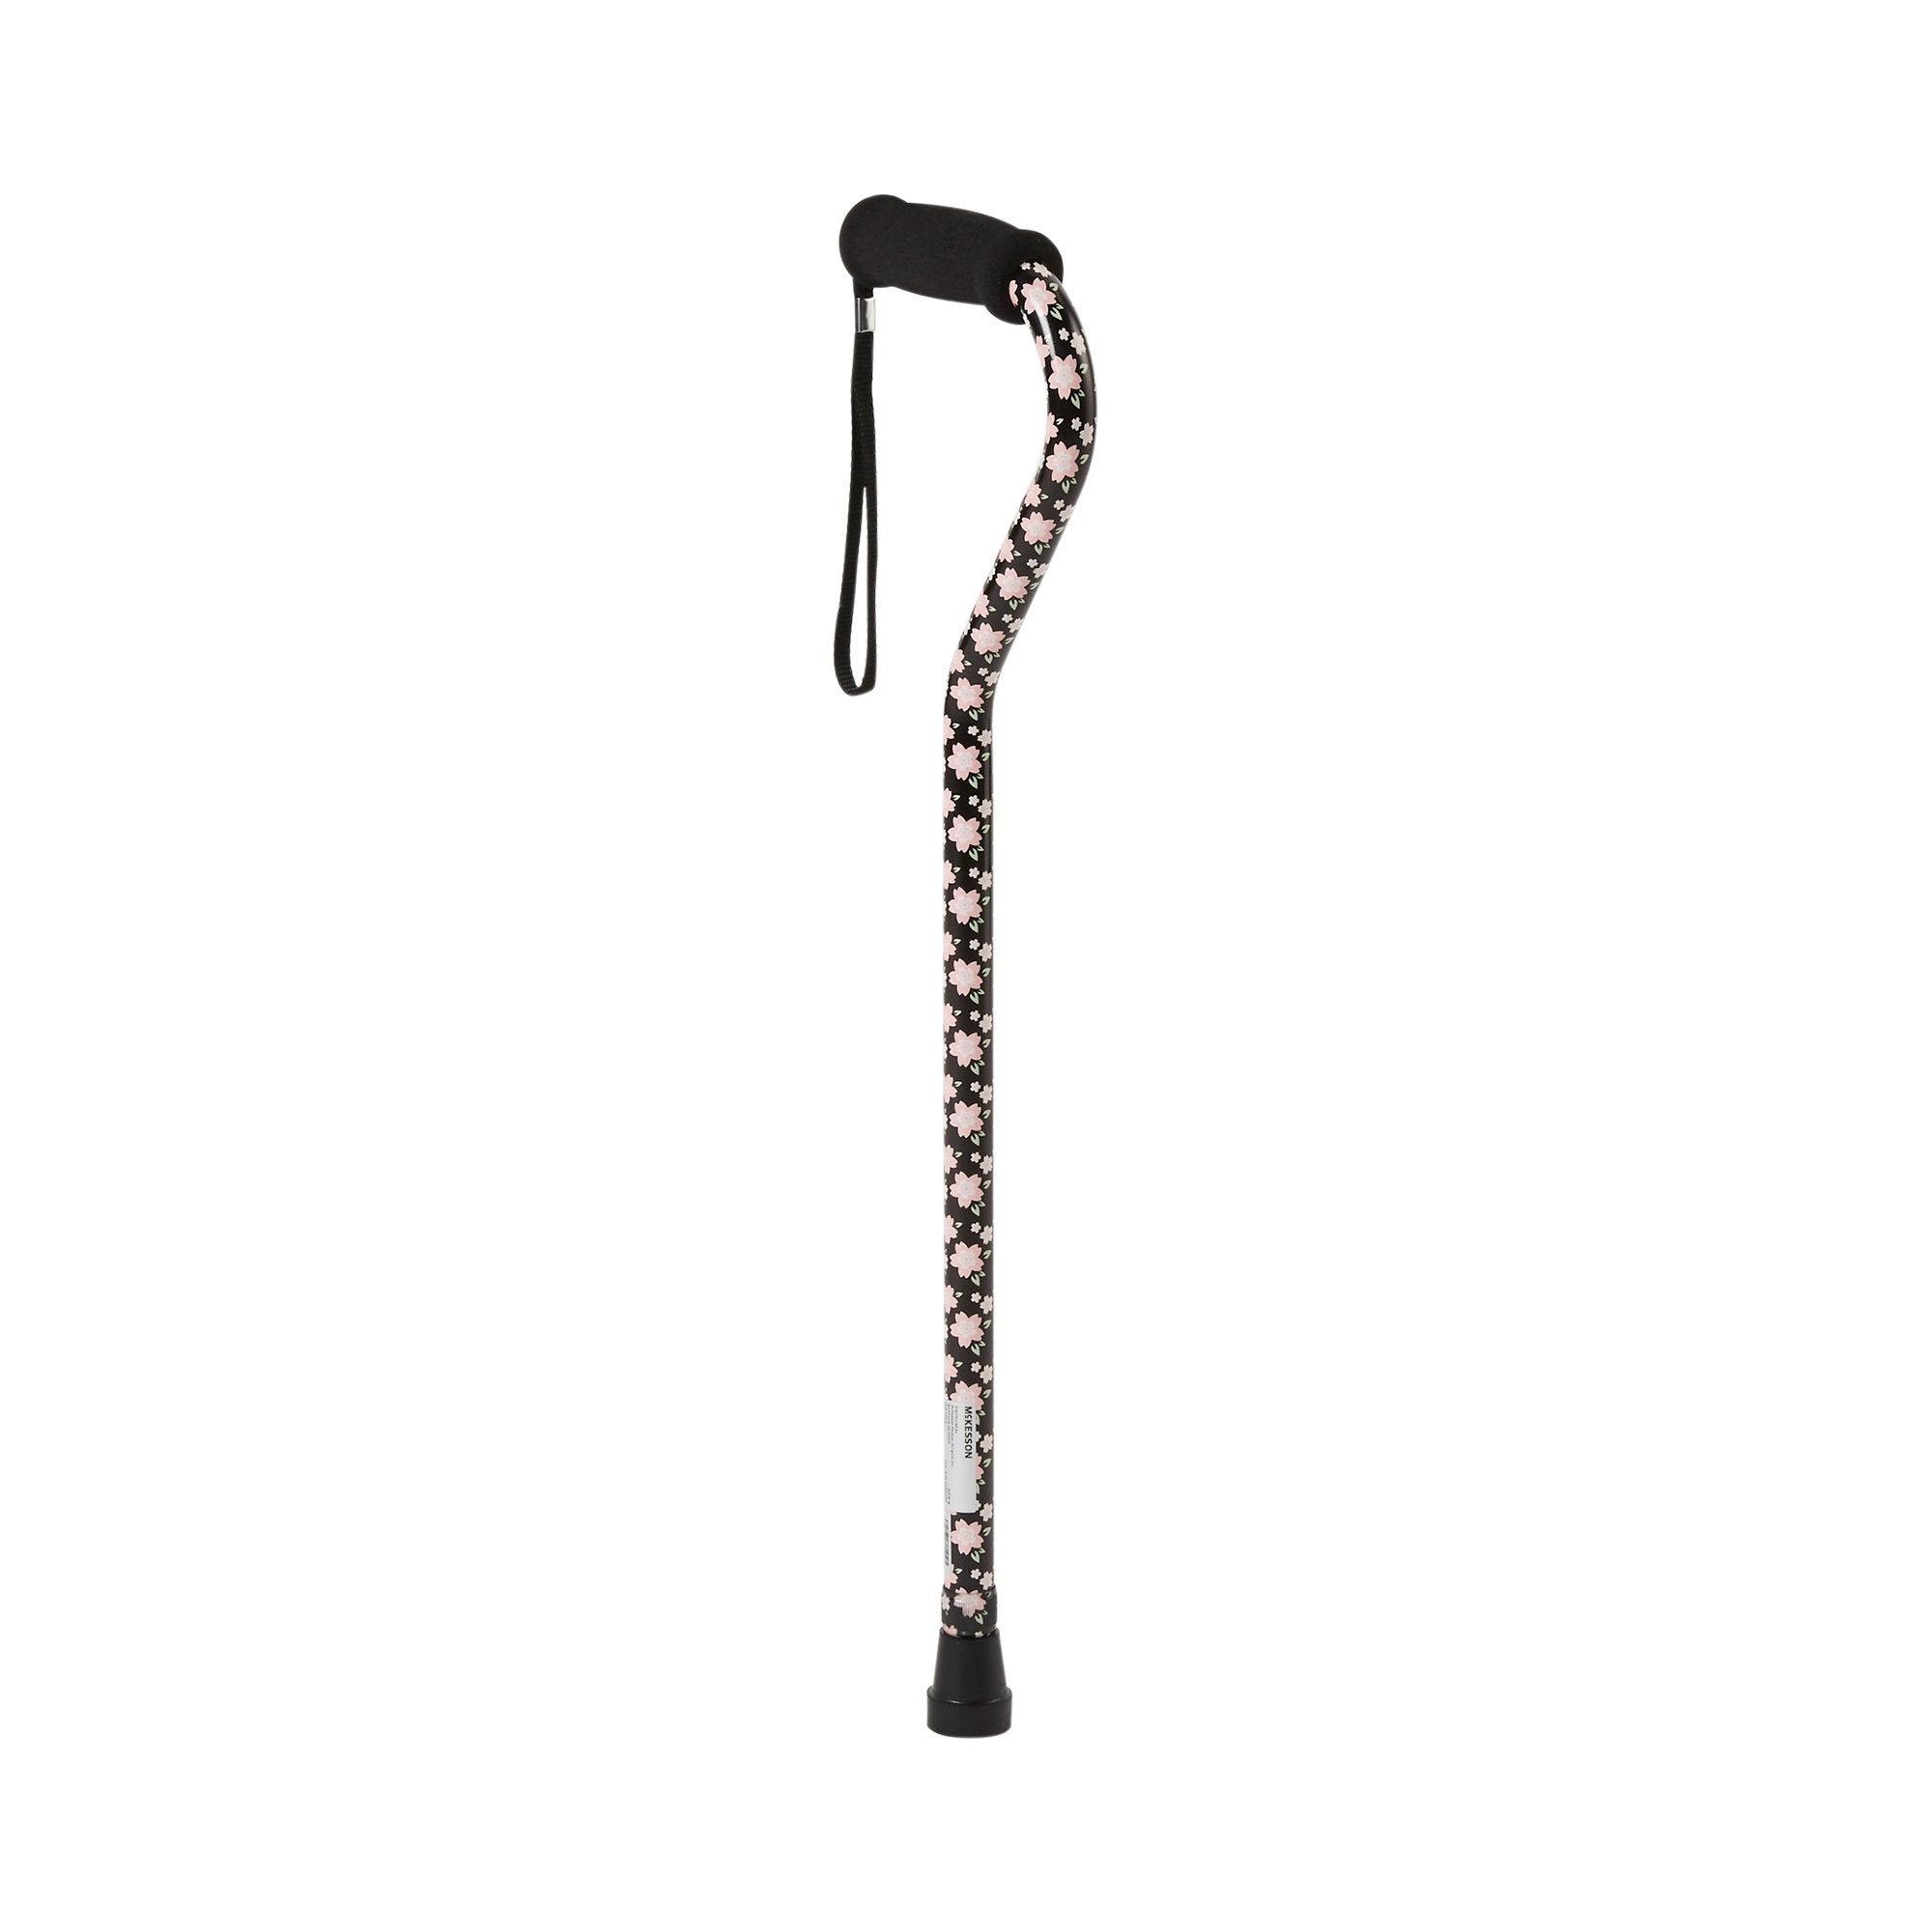 Offset Cane McKesson Aluminum 30 to 39 Inch Height Pink Floral